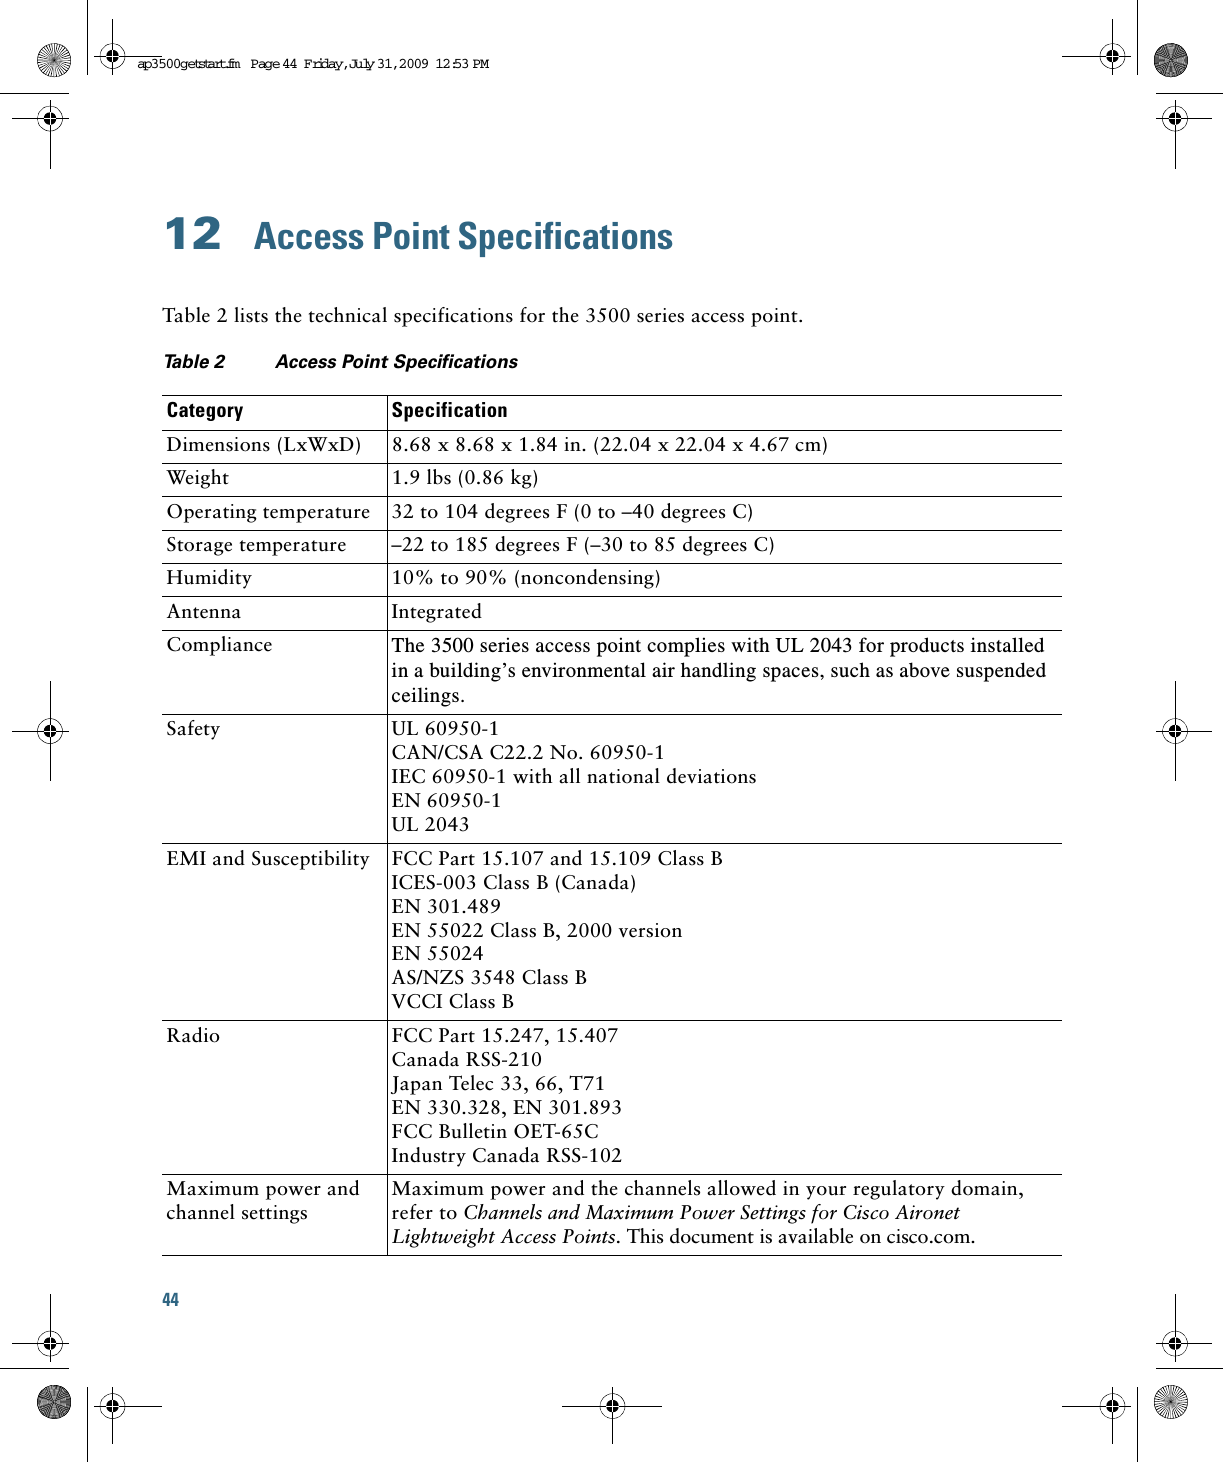 44 12  Access Point SpecificationsTable 2 lists the technical specifications for the 3500 series access point.Table 2 Access Point Specifications Category SpecificationDimensions (LxWxD) 8.68 x 8.68 x 1.84 in. (22.04 x 22.04 x 4.67 cm) Weight 1.9 lbs (0.86 kg)Operating temperature 32 to 104 degrees F (0 to –40 degrees C)Storage temperature –22 to 185 degrees F (–30 to 85 degrees C)Humidity 10% to 90% (noncondensing)Antenna IntegratedCompliance The 3500 series access point complies with UL 2043 for products installed in a building’s environmental air handling spaces, such as above suspended ceilings.Safety UL 60950-1CAN/CSA C22.2 No. 60950-1IEC 60950-1 with all national deviationsEN 60950-1UL 2043EMI and Susceptibility FCC Part 15.107 and 15.109 Class BICES-003 Class B (Canada)EN 301.489EN 55022 Class B, 2000 version EN 55024AS/NZS 3548 Class BVCCI Class BRadio FCC Part 15.247, 15.407Canada RSS-210Japan Telec 33, 66, T71EN 330.328, EN 301.893FCC Bulletin OET-65CIndustry Canada RSS-102Maximum power and channel settingsMaximum power and the channels allowed in your regulatory domain, refer to Channels and Maximum Power Settings for Cisco Aironet Lightweight Access Points. This document is available on cisco.com.ap3500getstart.fm  Page 44  Friday, Ju ly 31, 2009  12:53 PM